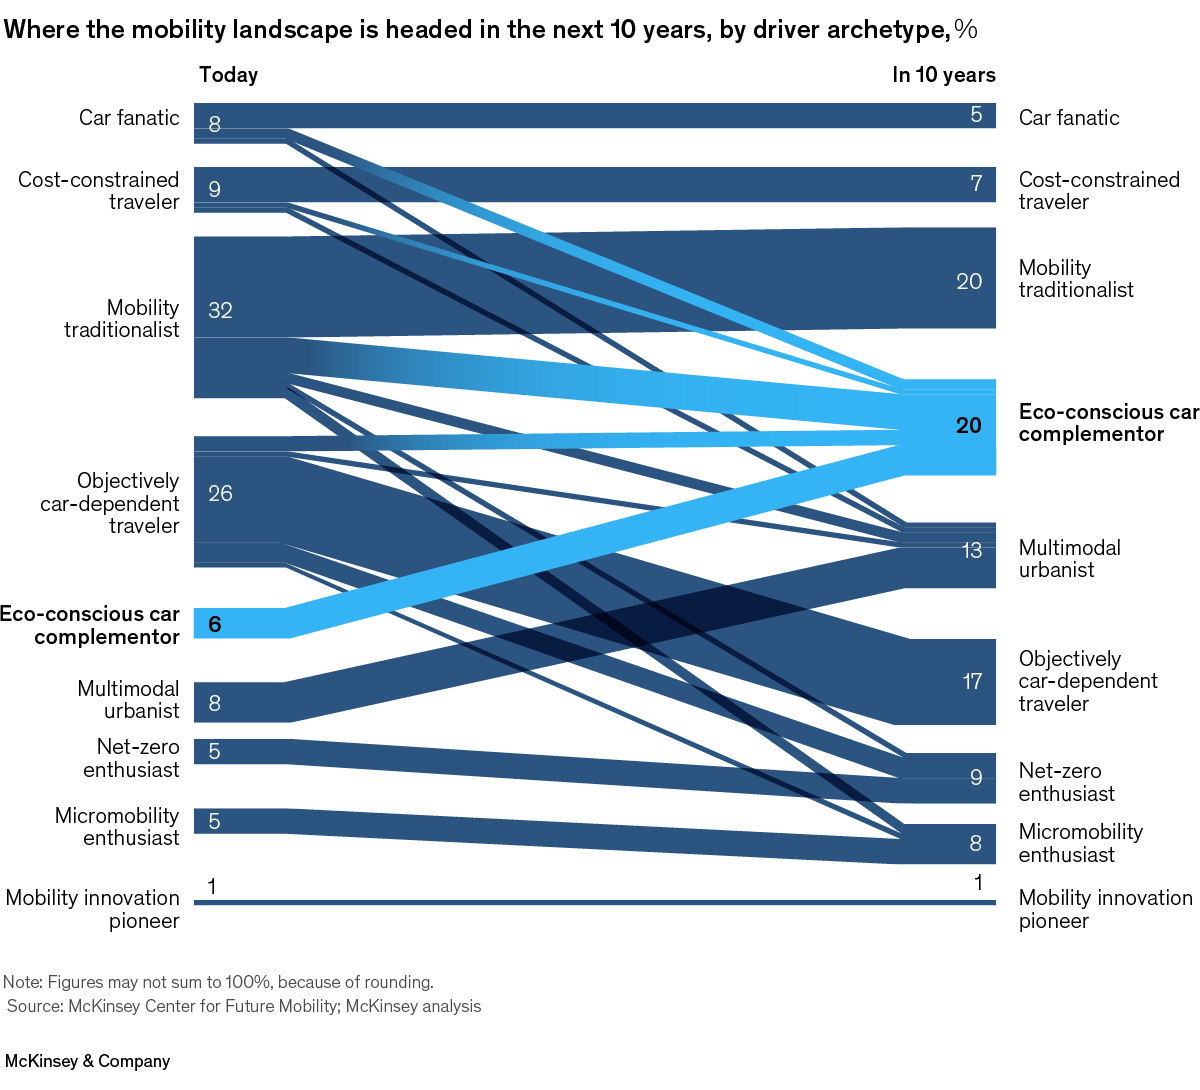 Exhibit of where the mobility landscape is headed in the next 10 years, by driver archetype